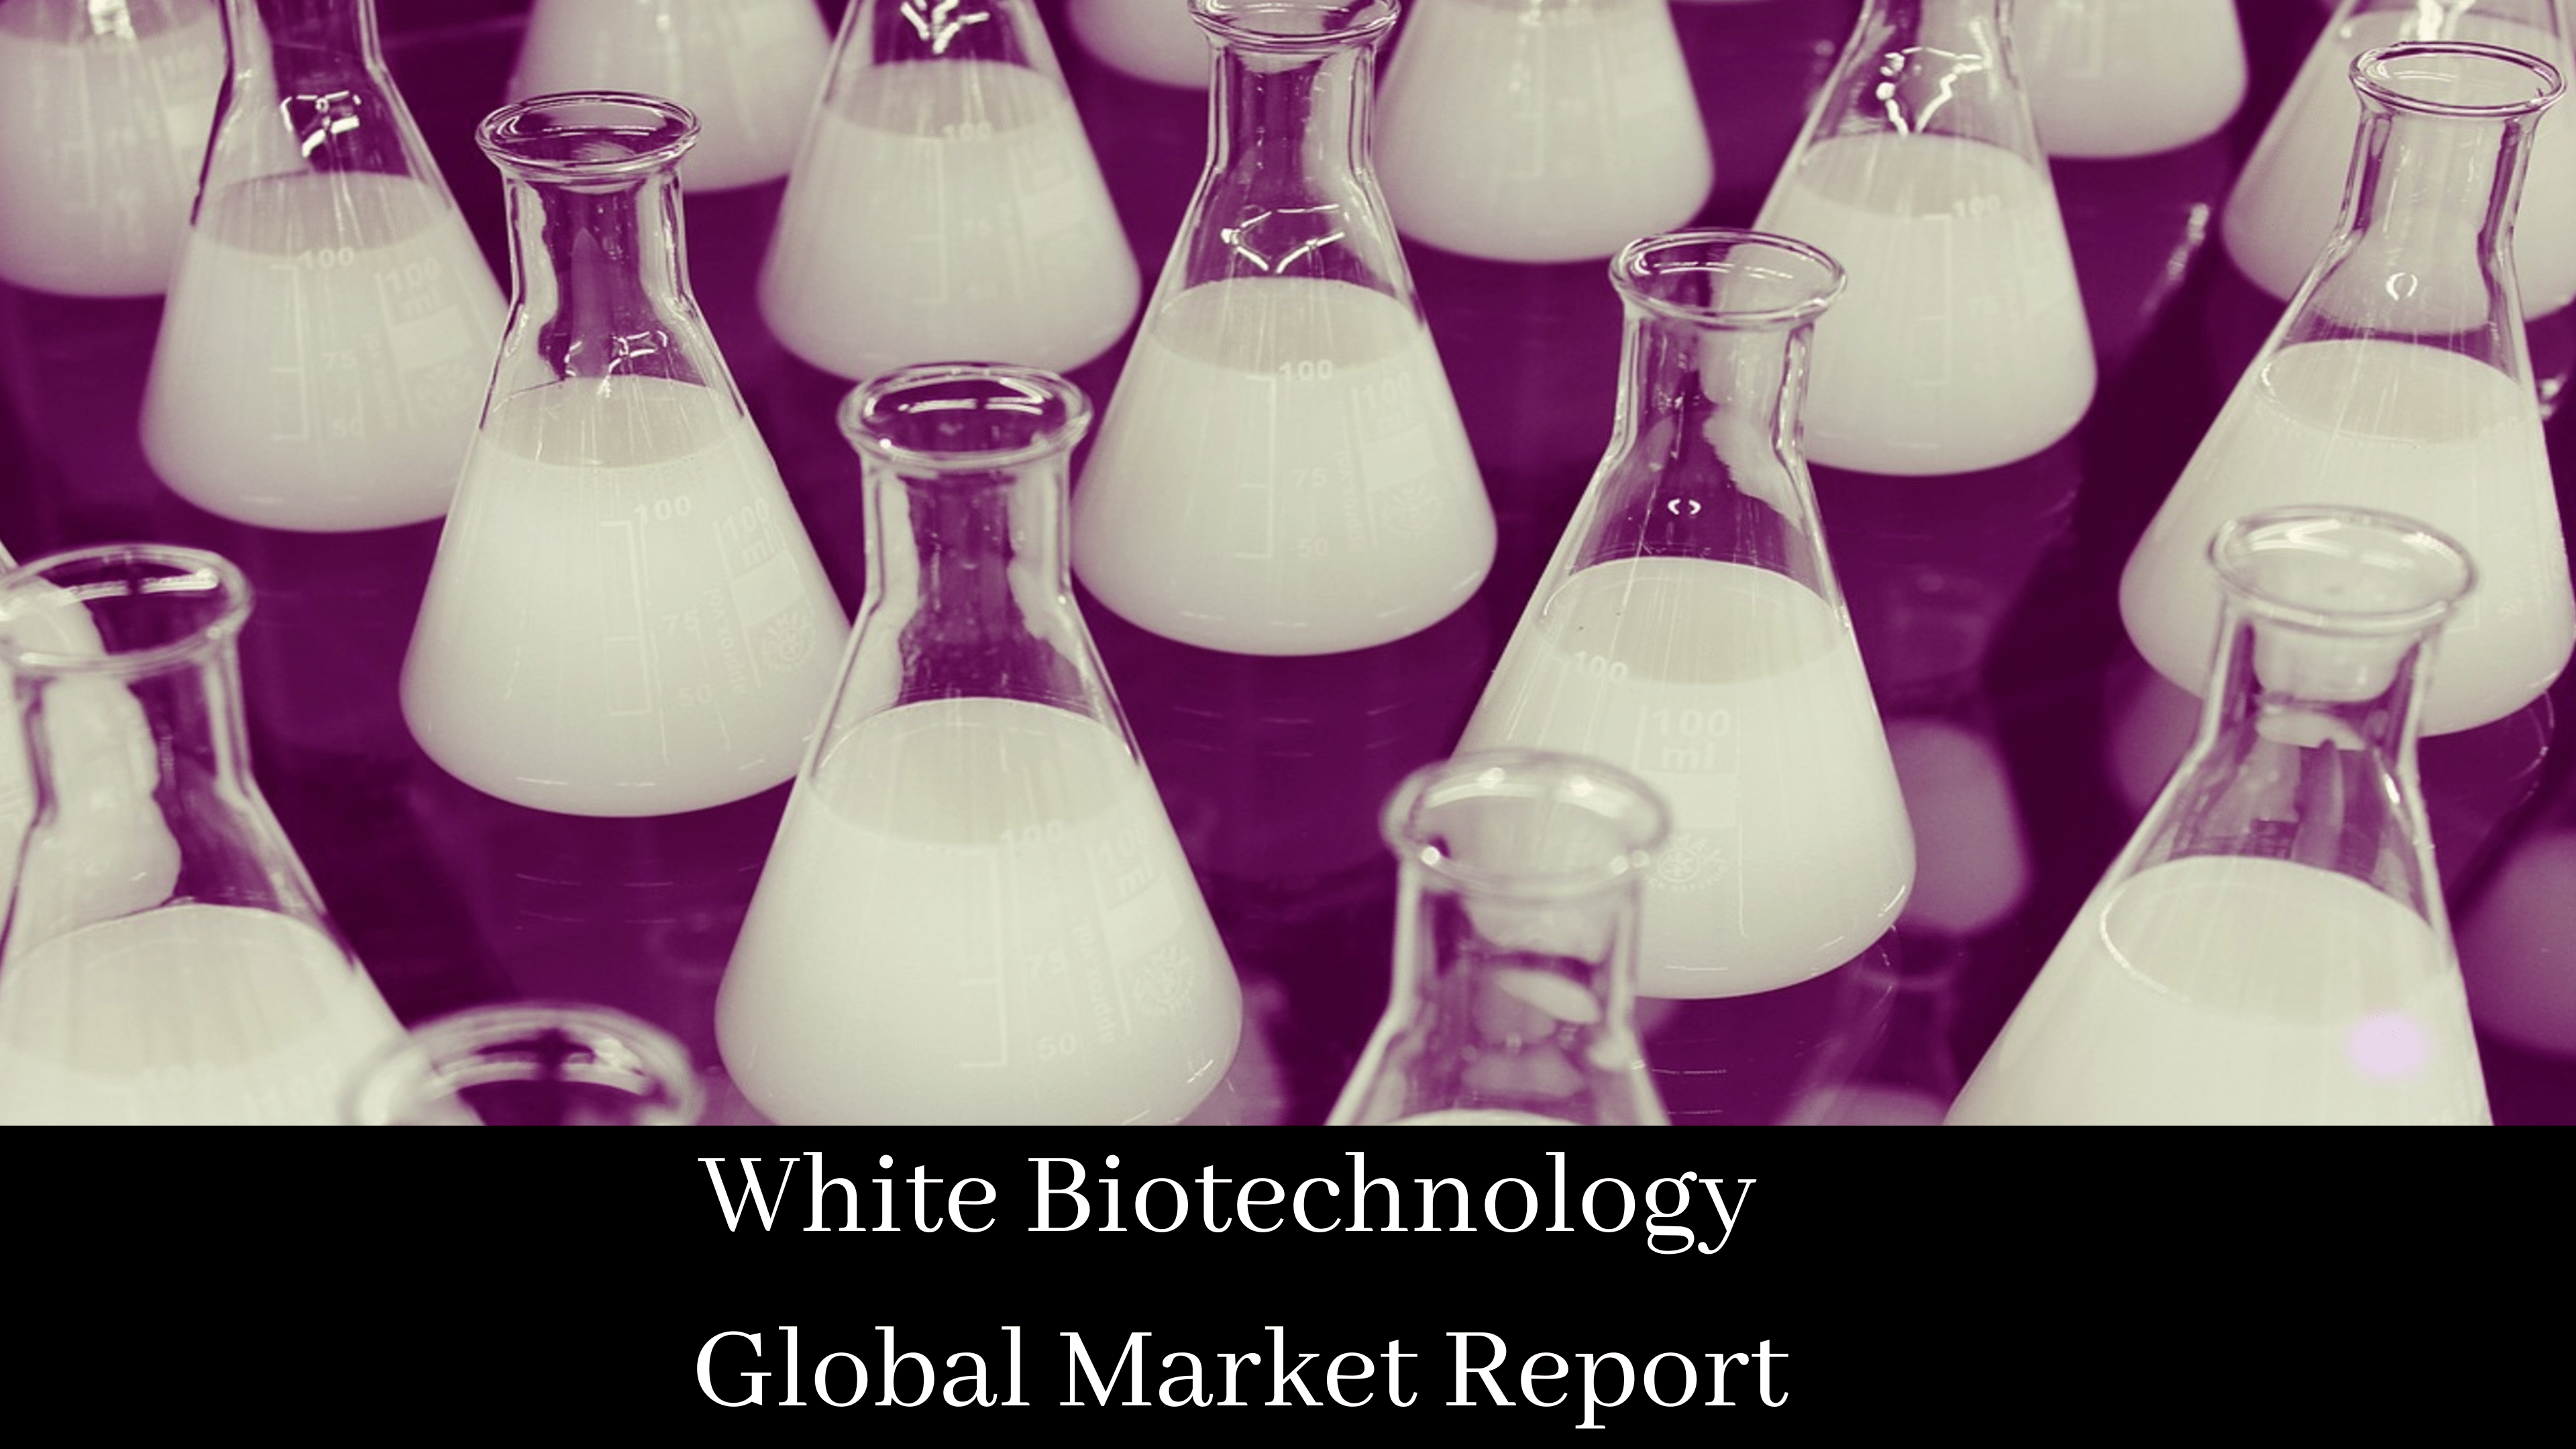 White Biotechnology: Pioneering a Sustainable and Environmentally Friendly Future Forecast to 2028